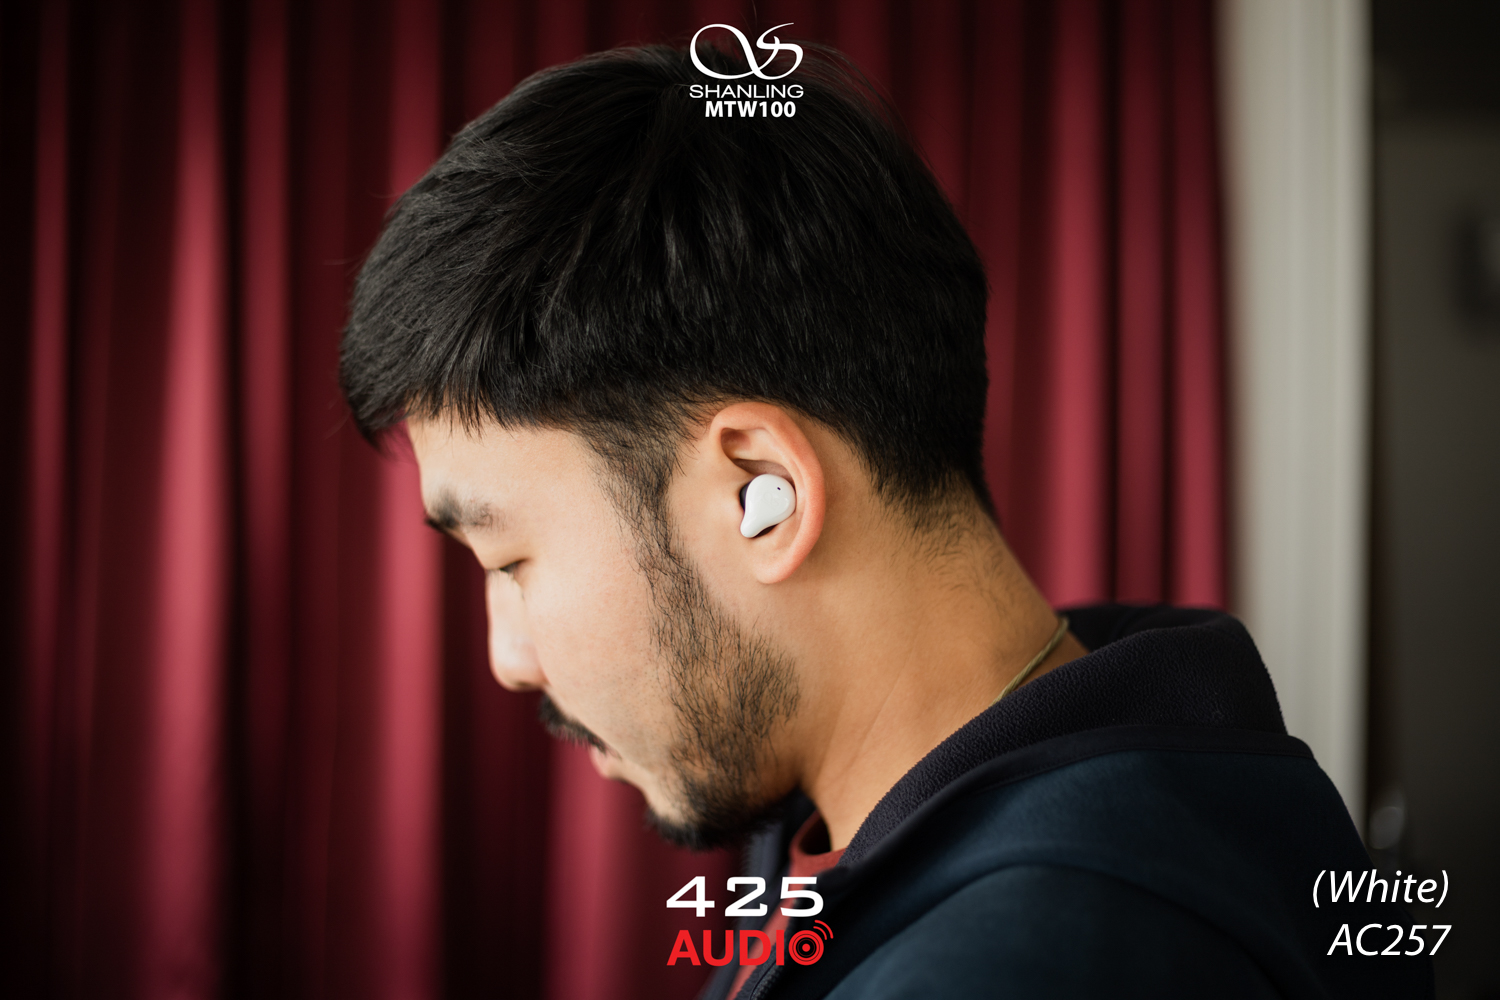 shanling,true wireless,shanling mtw100,white,dynamic driver,graphene,ipx7,ambient sound,in-ear,touch control,long battery life,bass,earphones,bluetooth 5.0